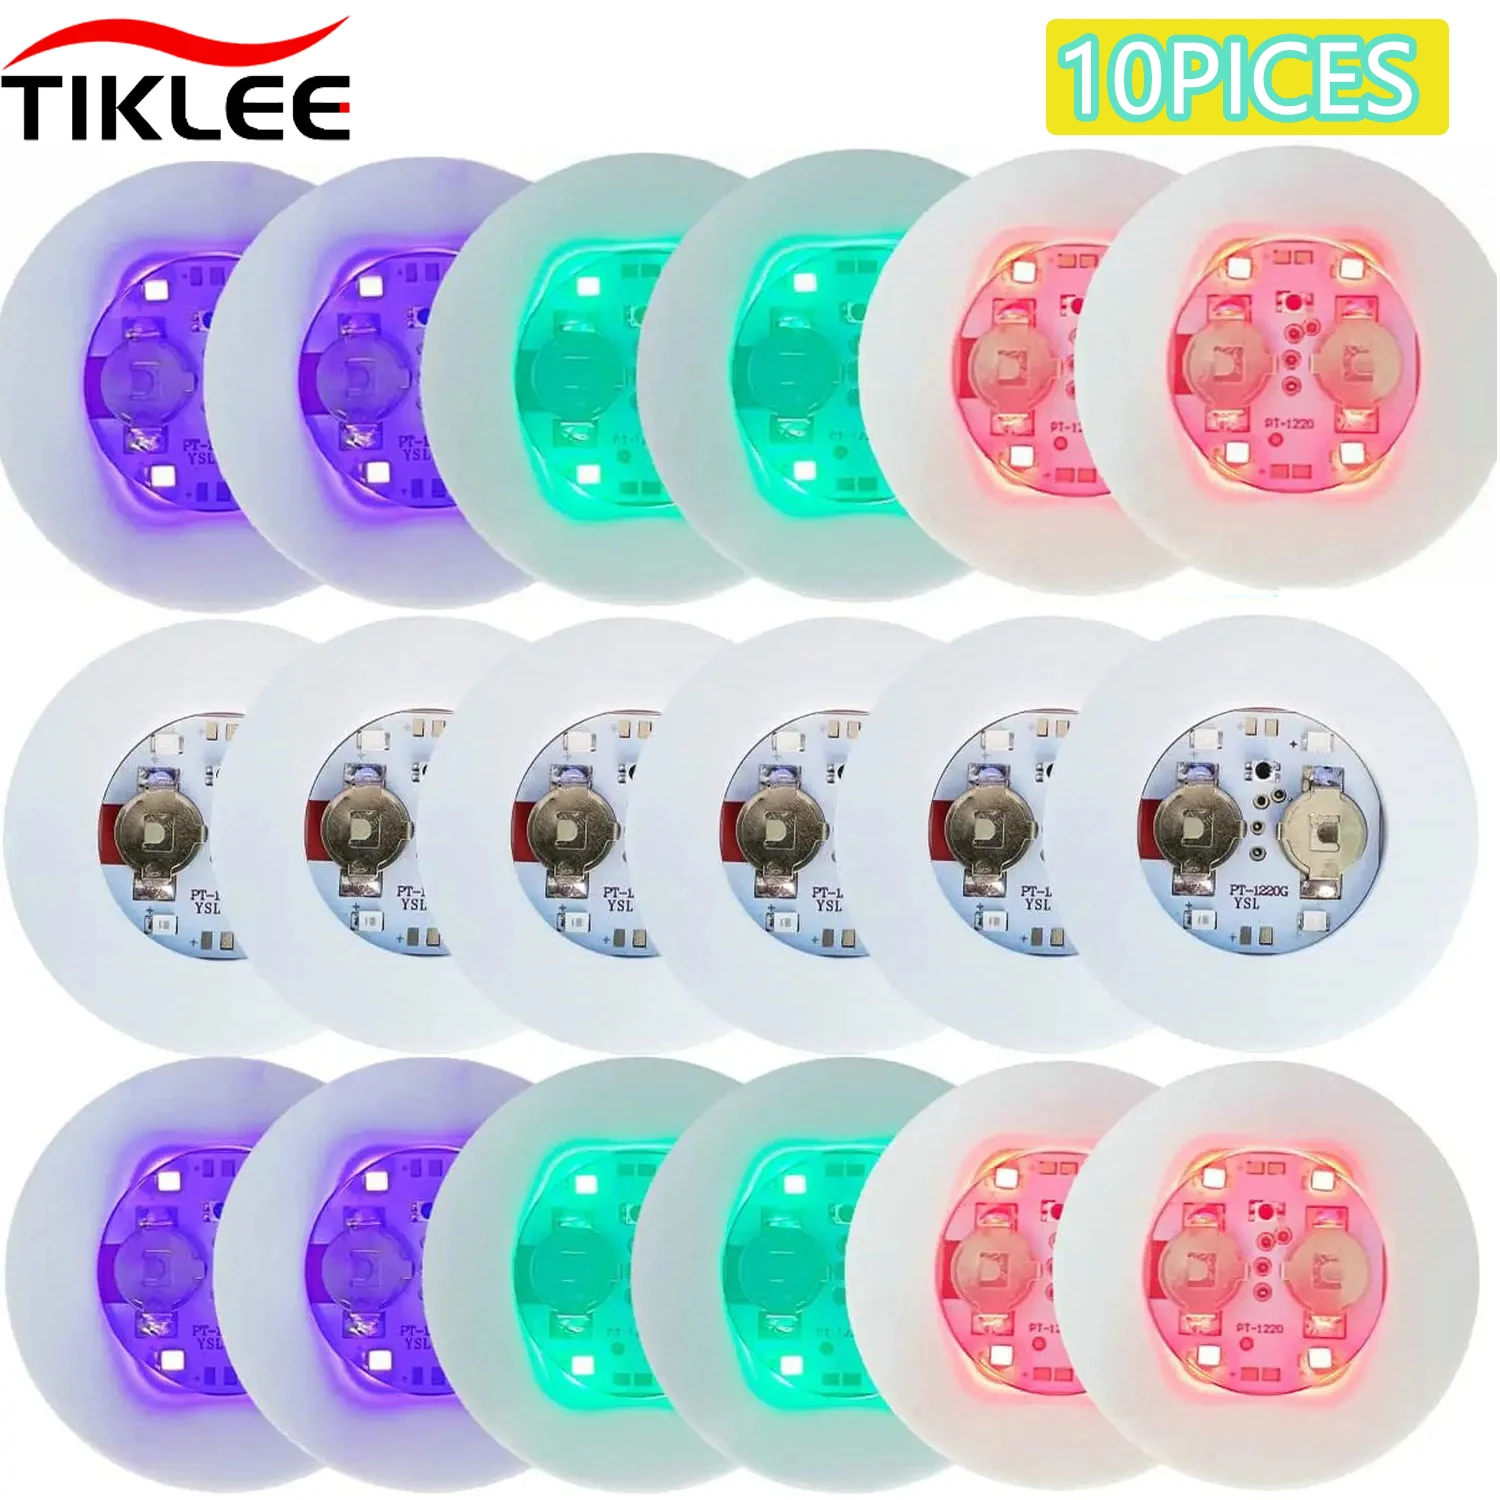 10PCS bright LED Coaster Lights Cup Colorful Glowing Wine Bottle Stickers Bar Wedding Party Lighting Glowing Wine Bottle Sticker led coaster stickers luminous drinks cup pads wine liquor bottles coaster sticker bars atmosphere lights cup sticker pads